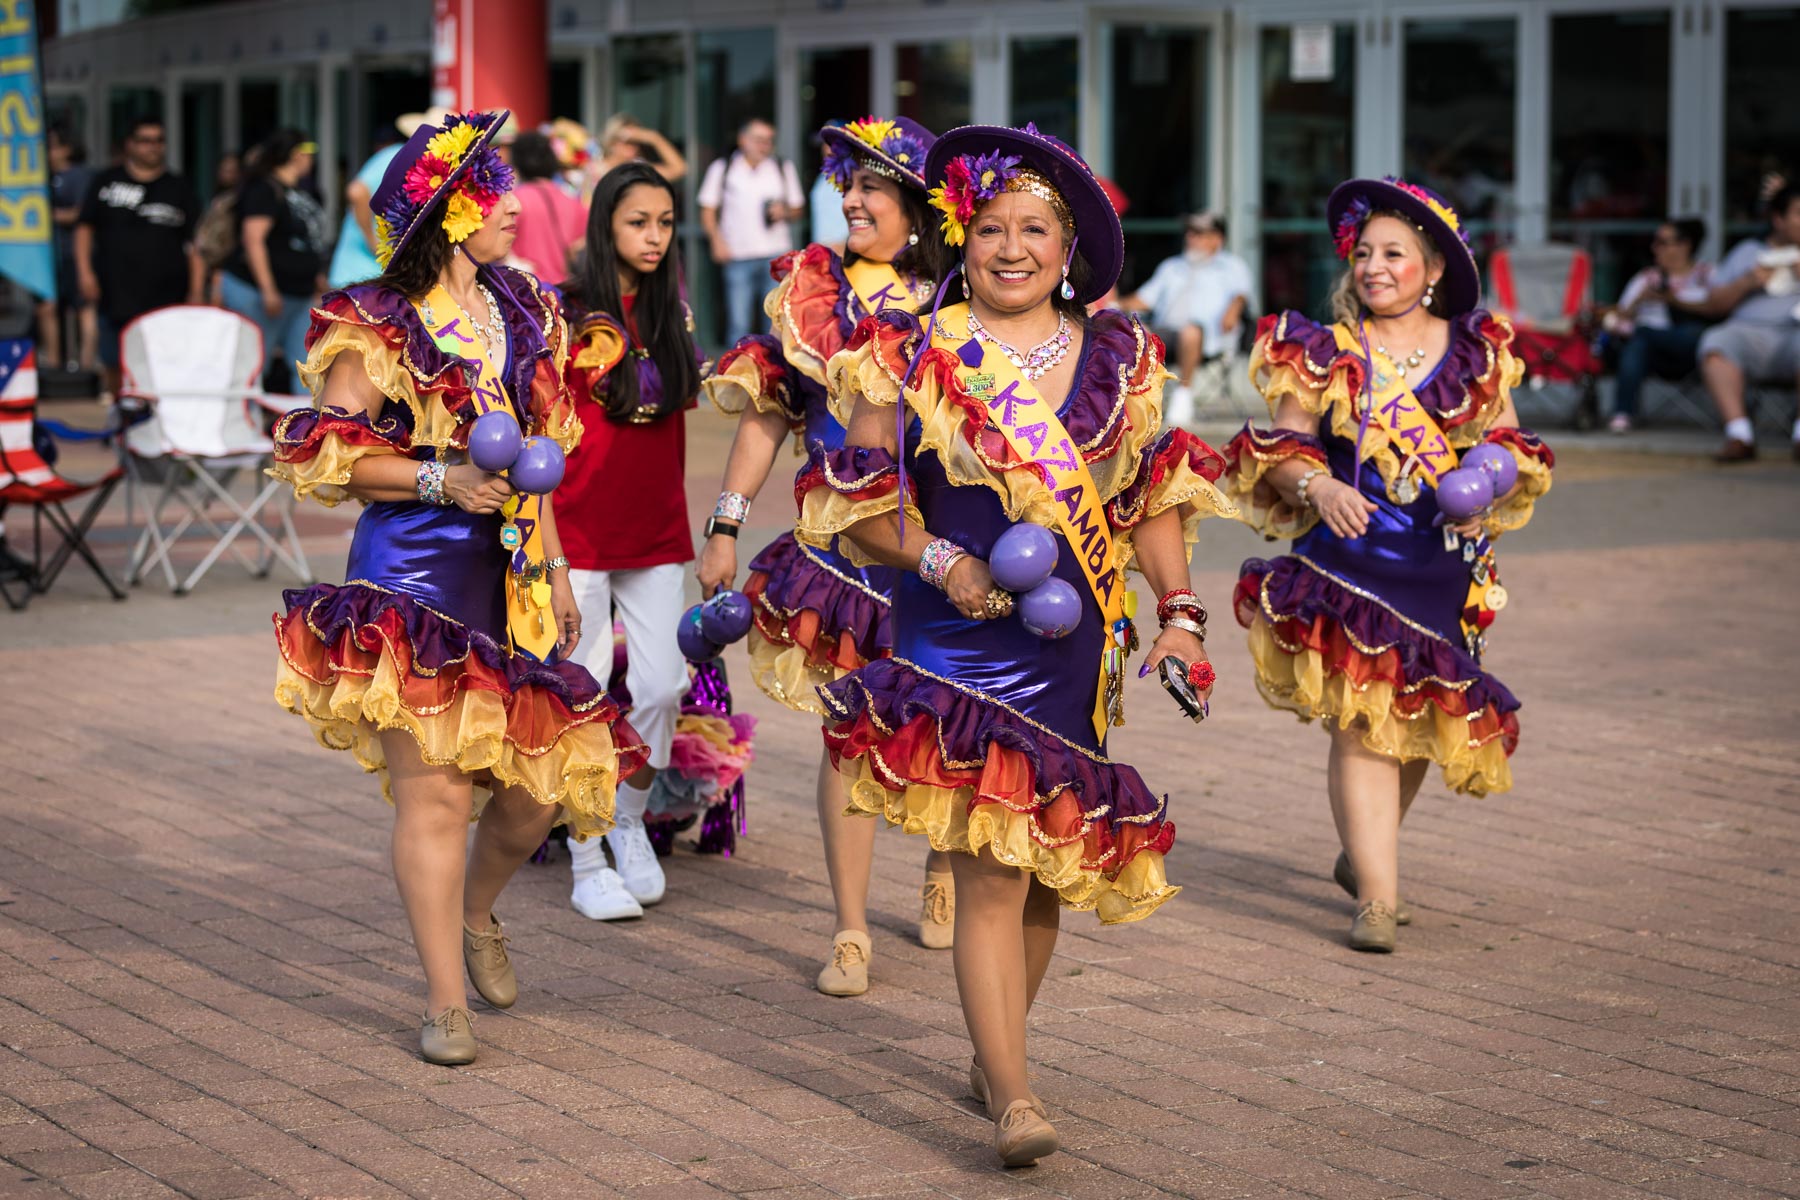 Colorful female dancers walking during Fiesta Fiesta for an article on the best Fiesta photos